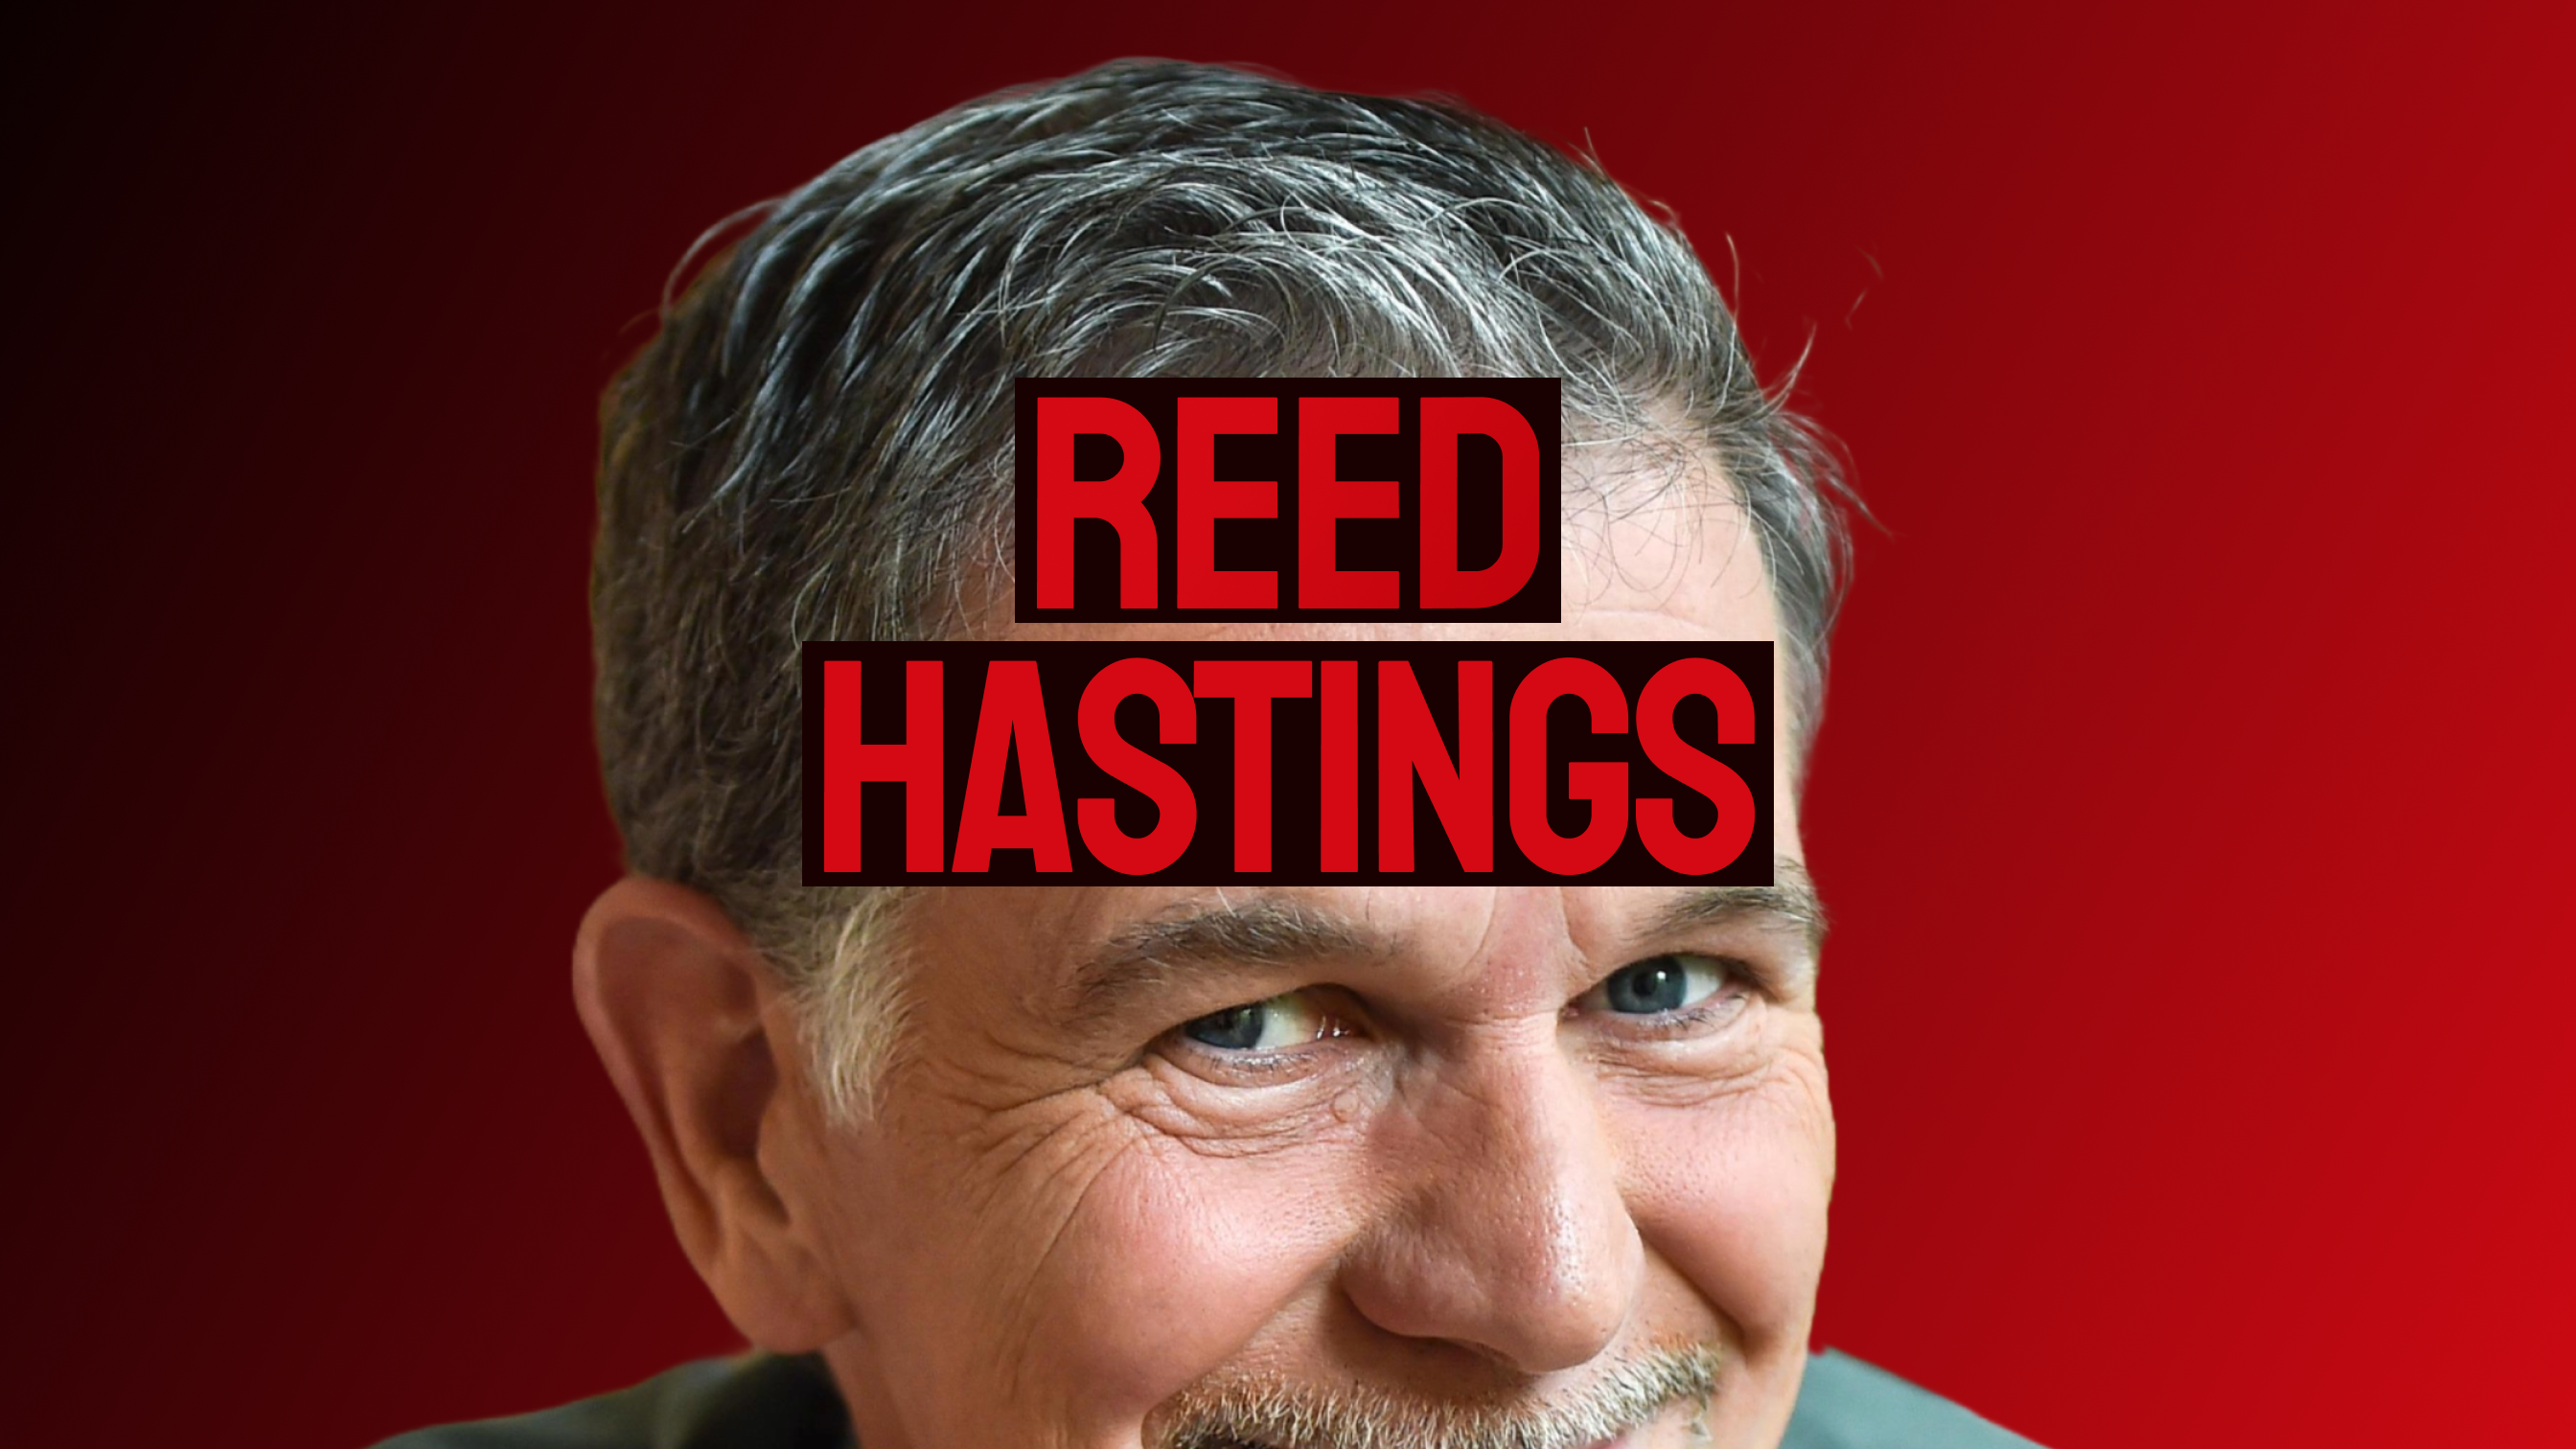 Reed Hasting - Co-Founder of Netflix